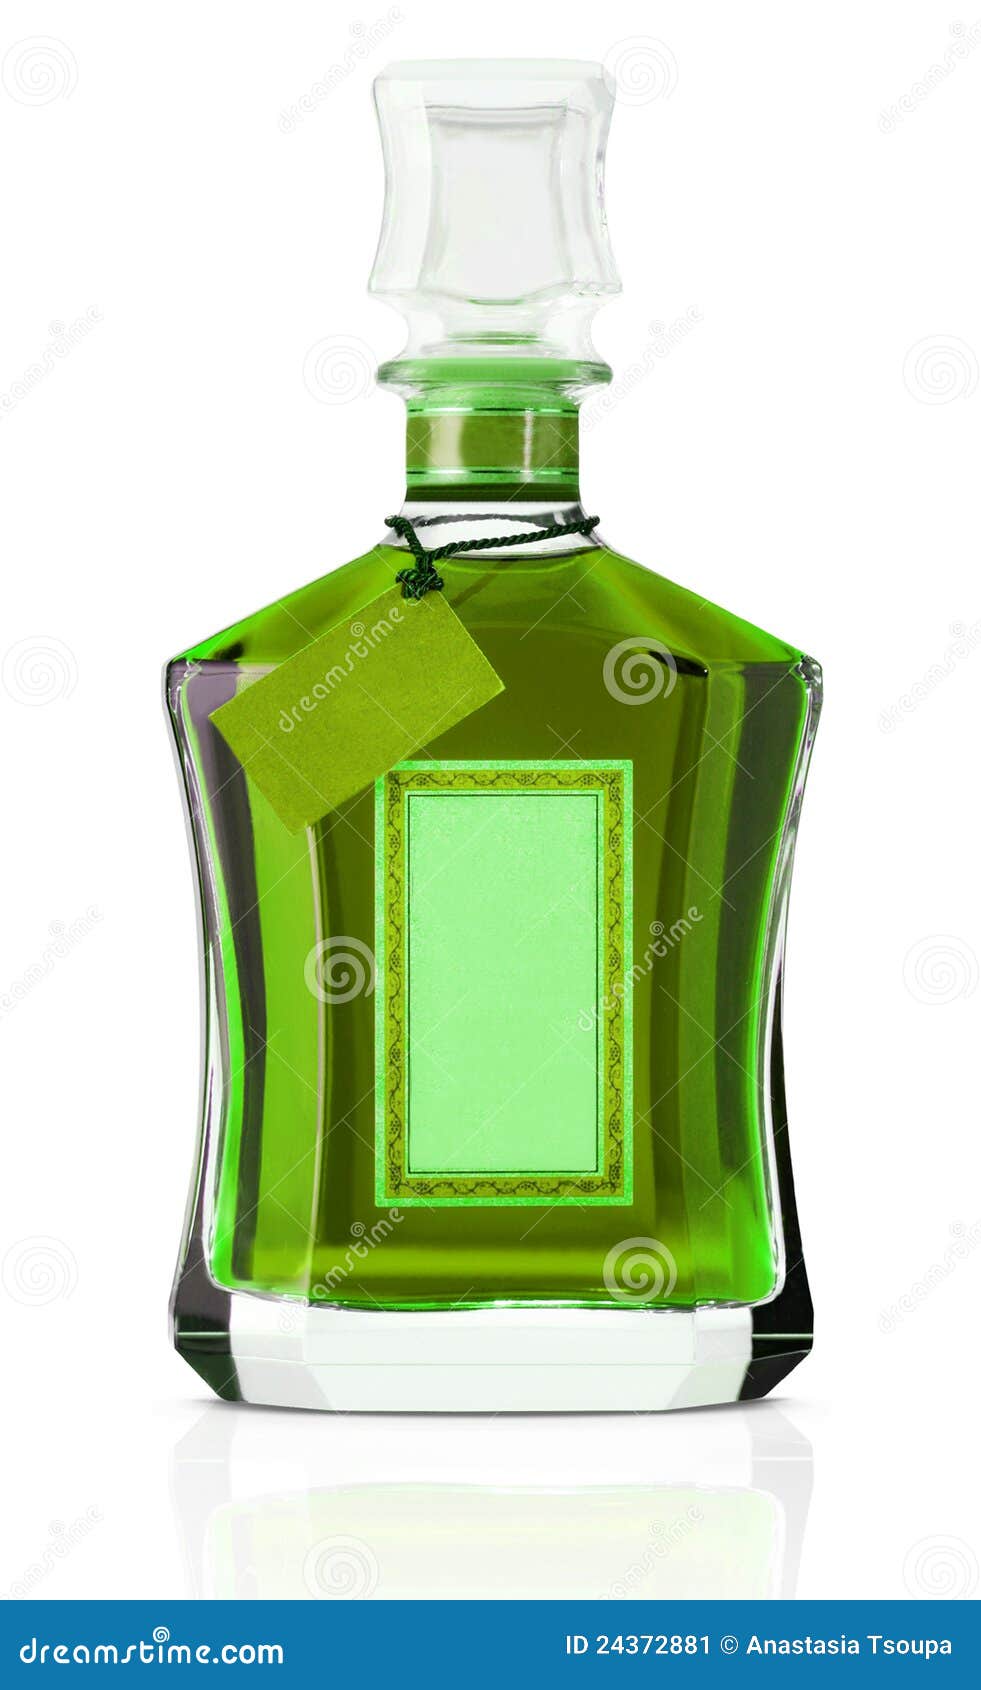 Bottle of green alcohol stock image. Image of label, empty - 24372881